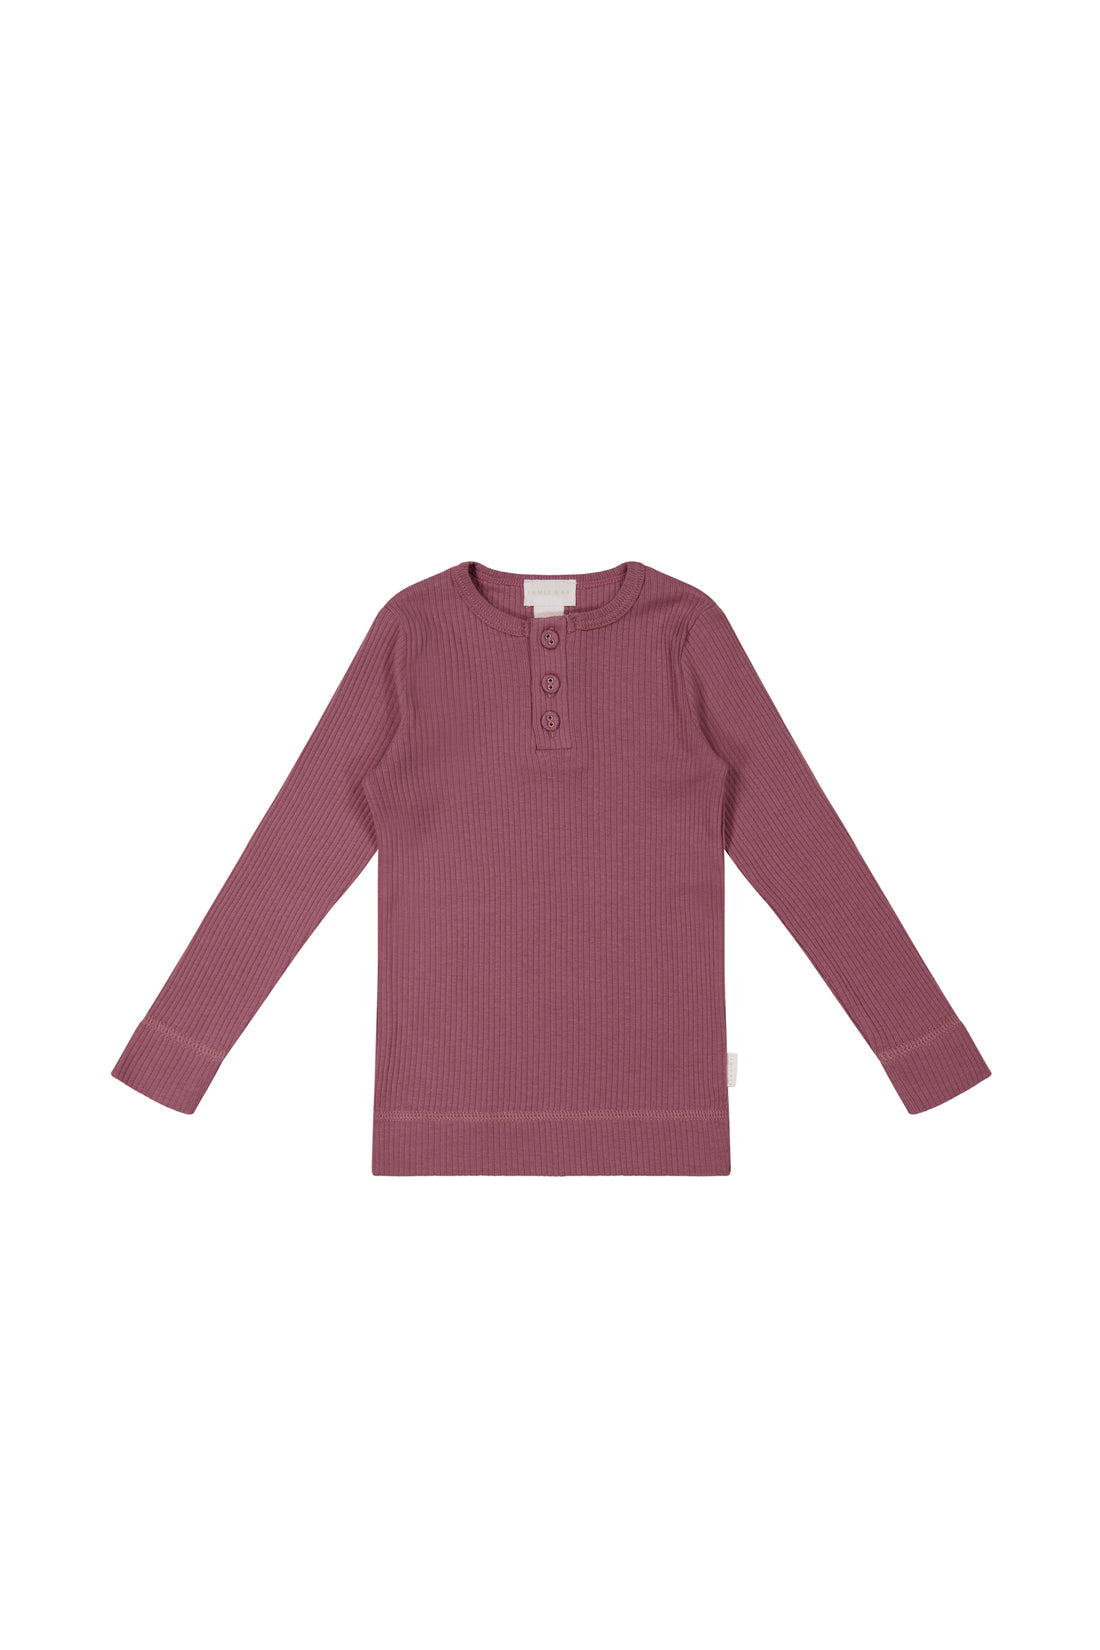 Organic Cotton Modal Long Sleeve Henley - Heather Childrens Top from Jamie Kay NZ